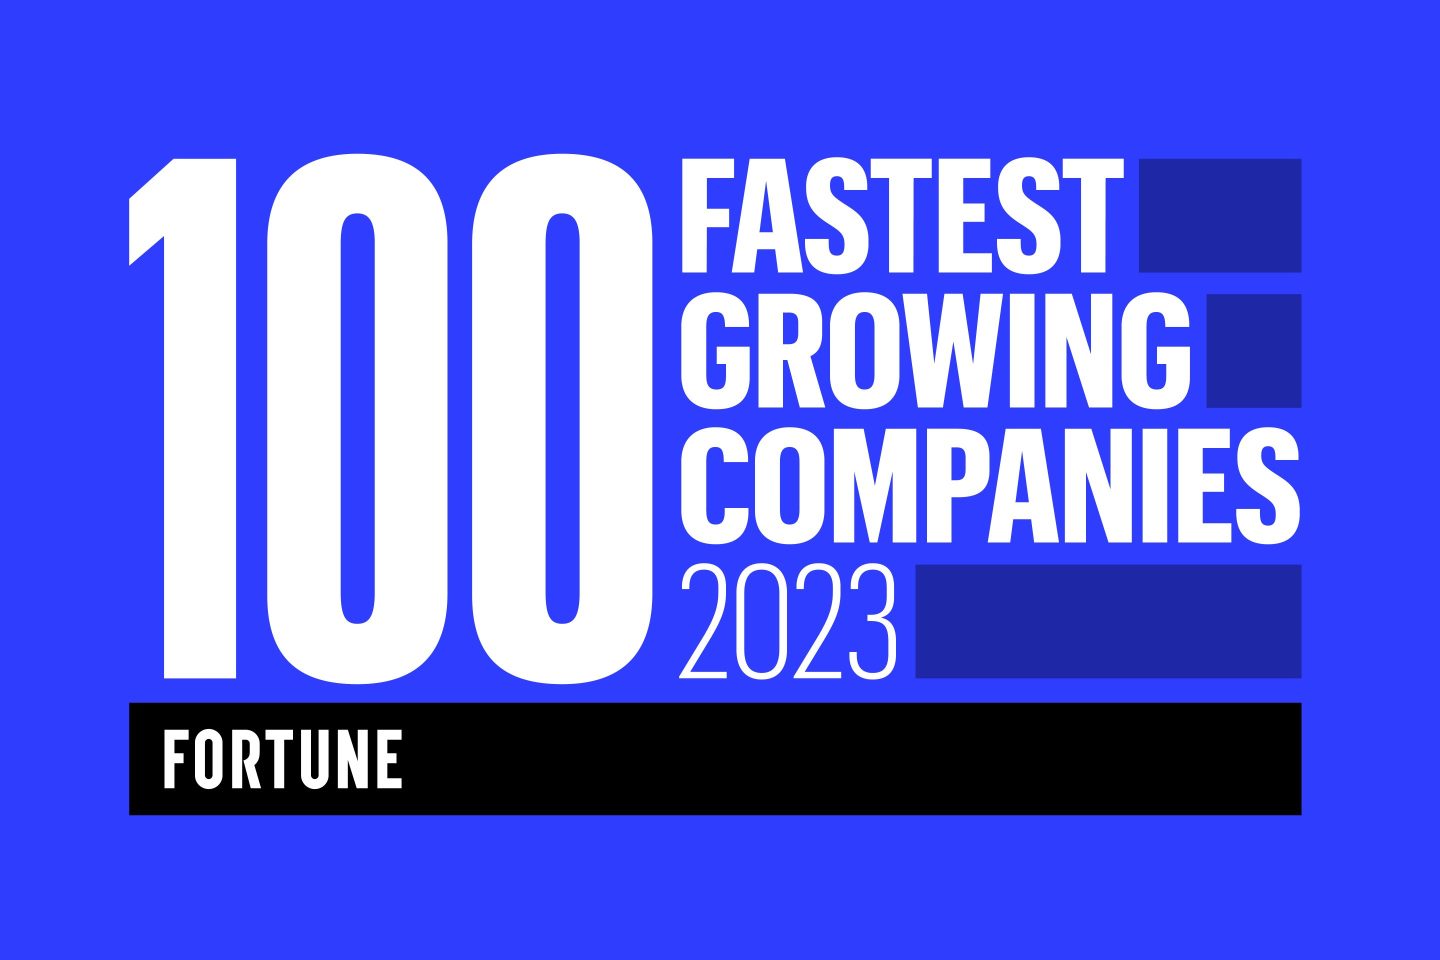 Fortune 100 Fastest Growing Companies 2023